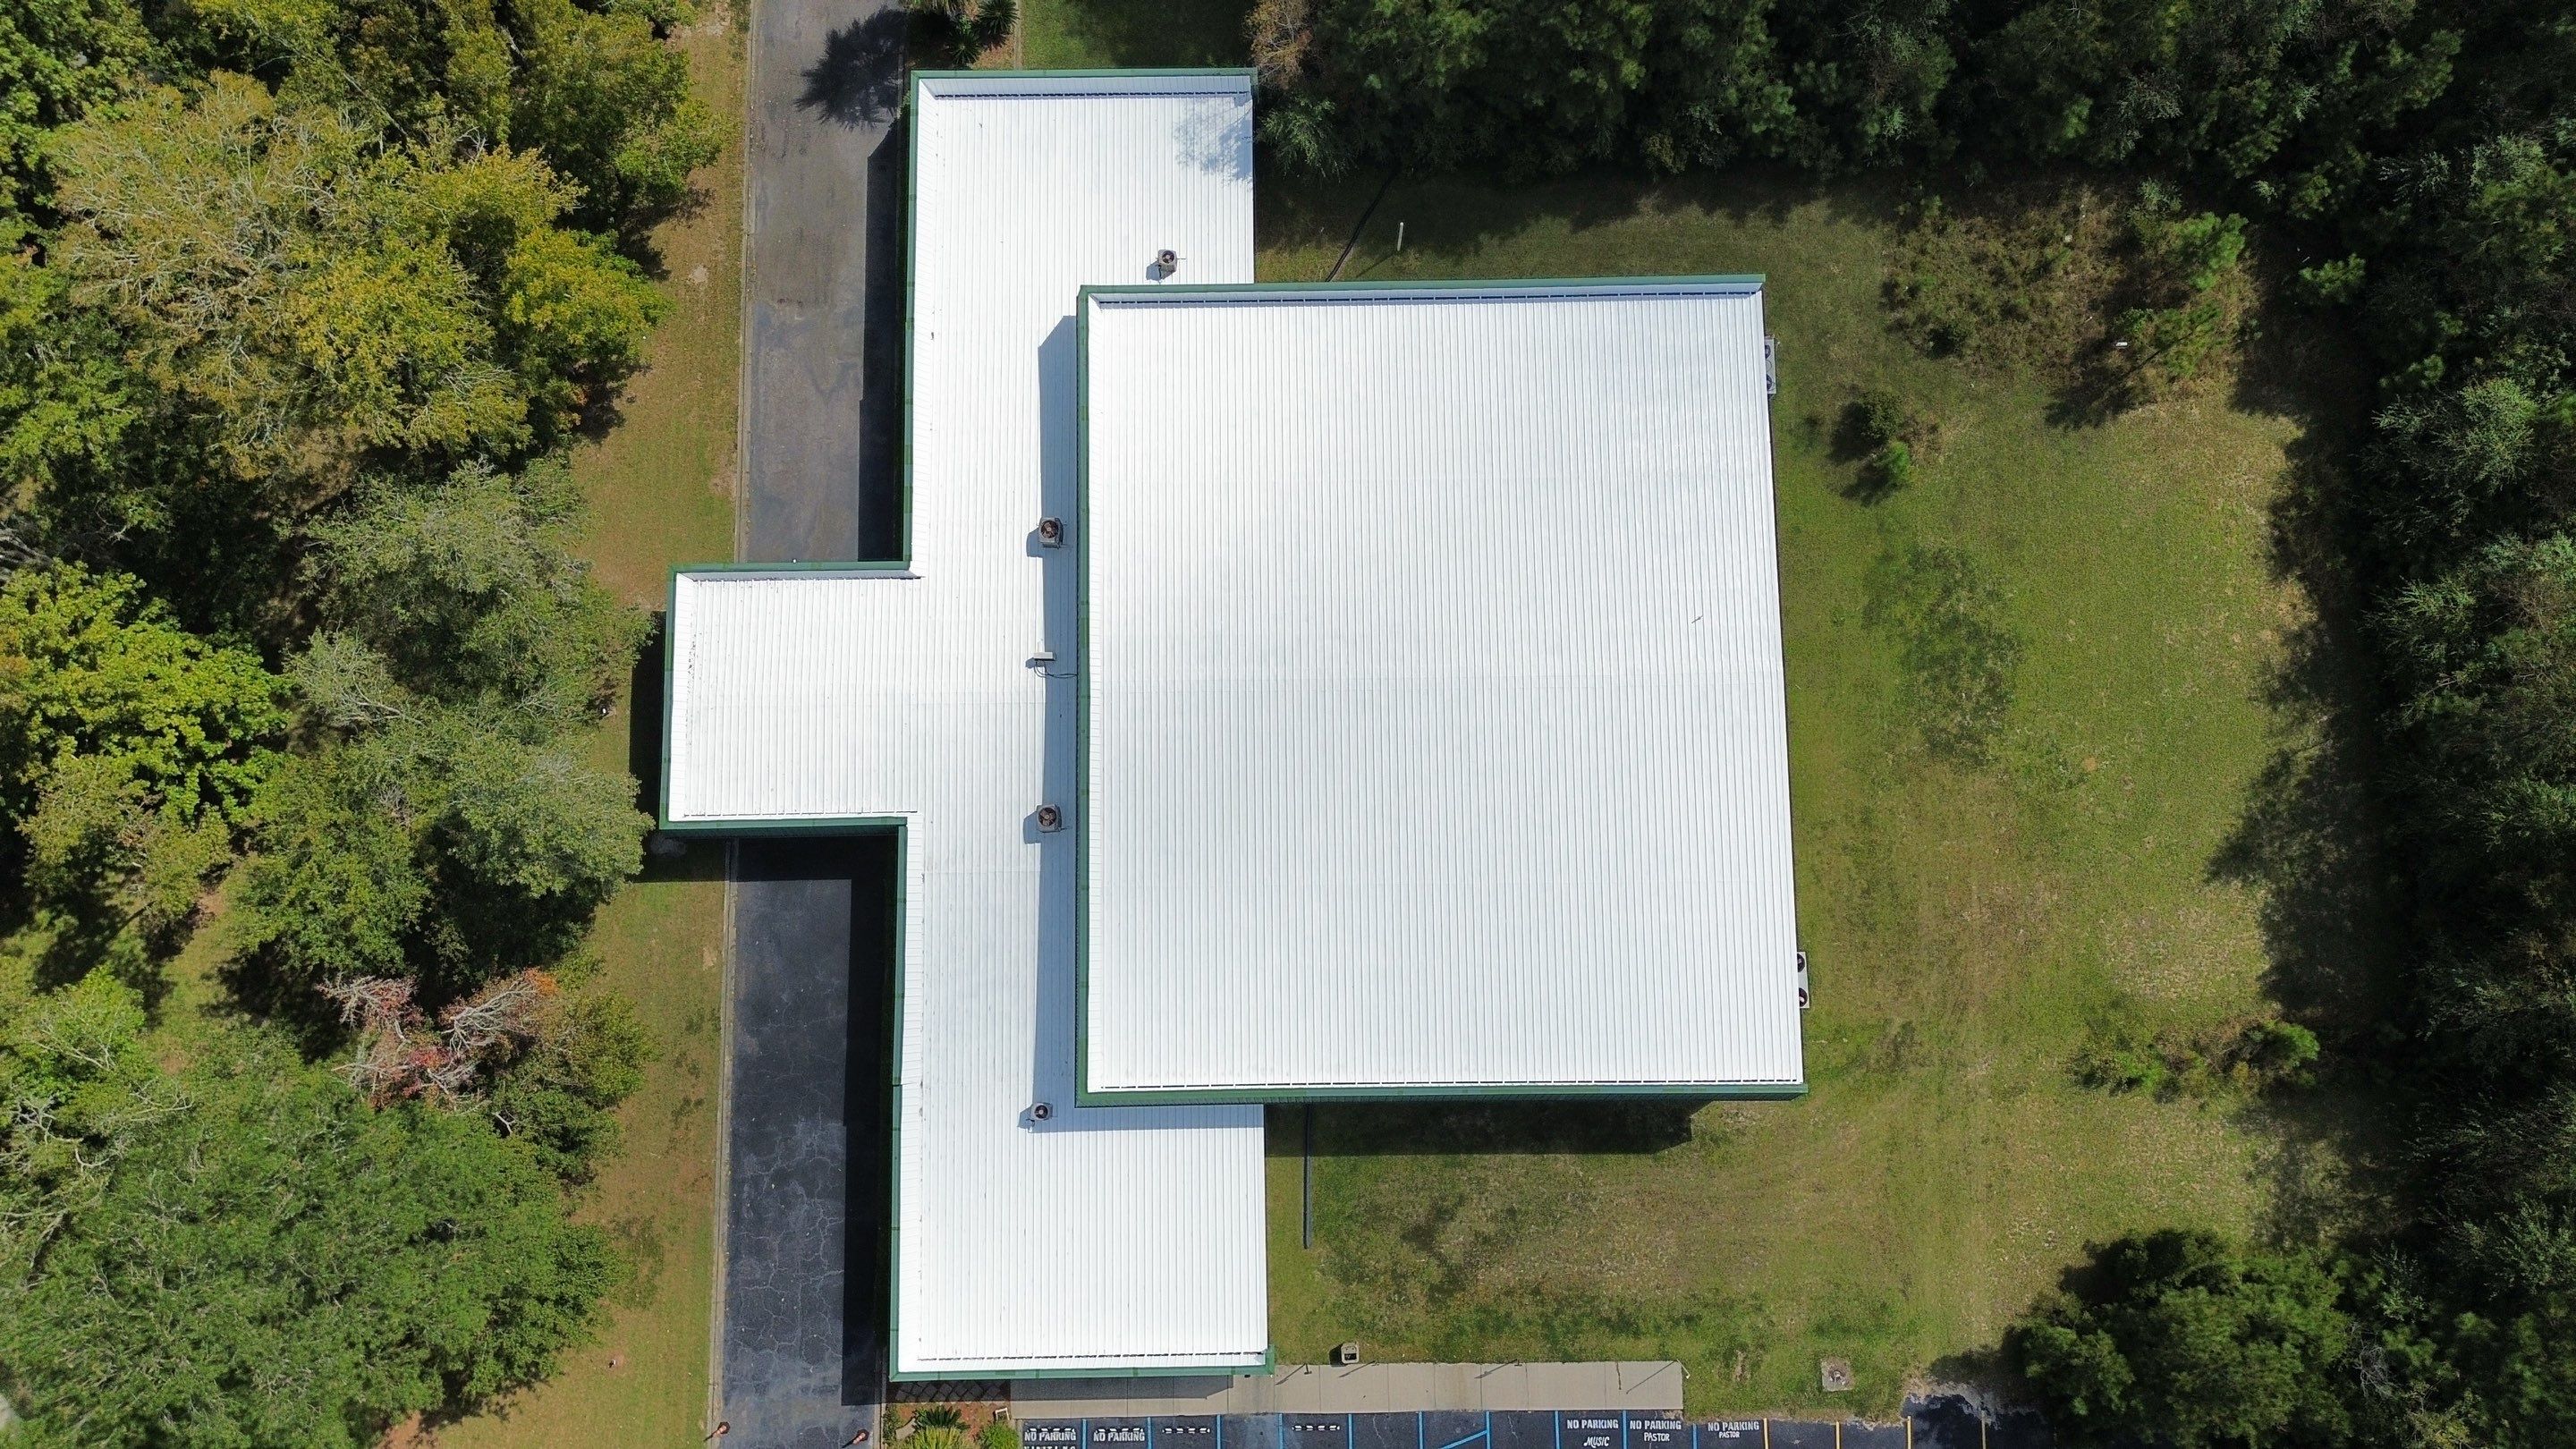 Tropical 901 - Elastomeric Metal Roof Coating for Word Ministry Church in Summerville, SC